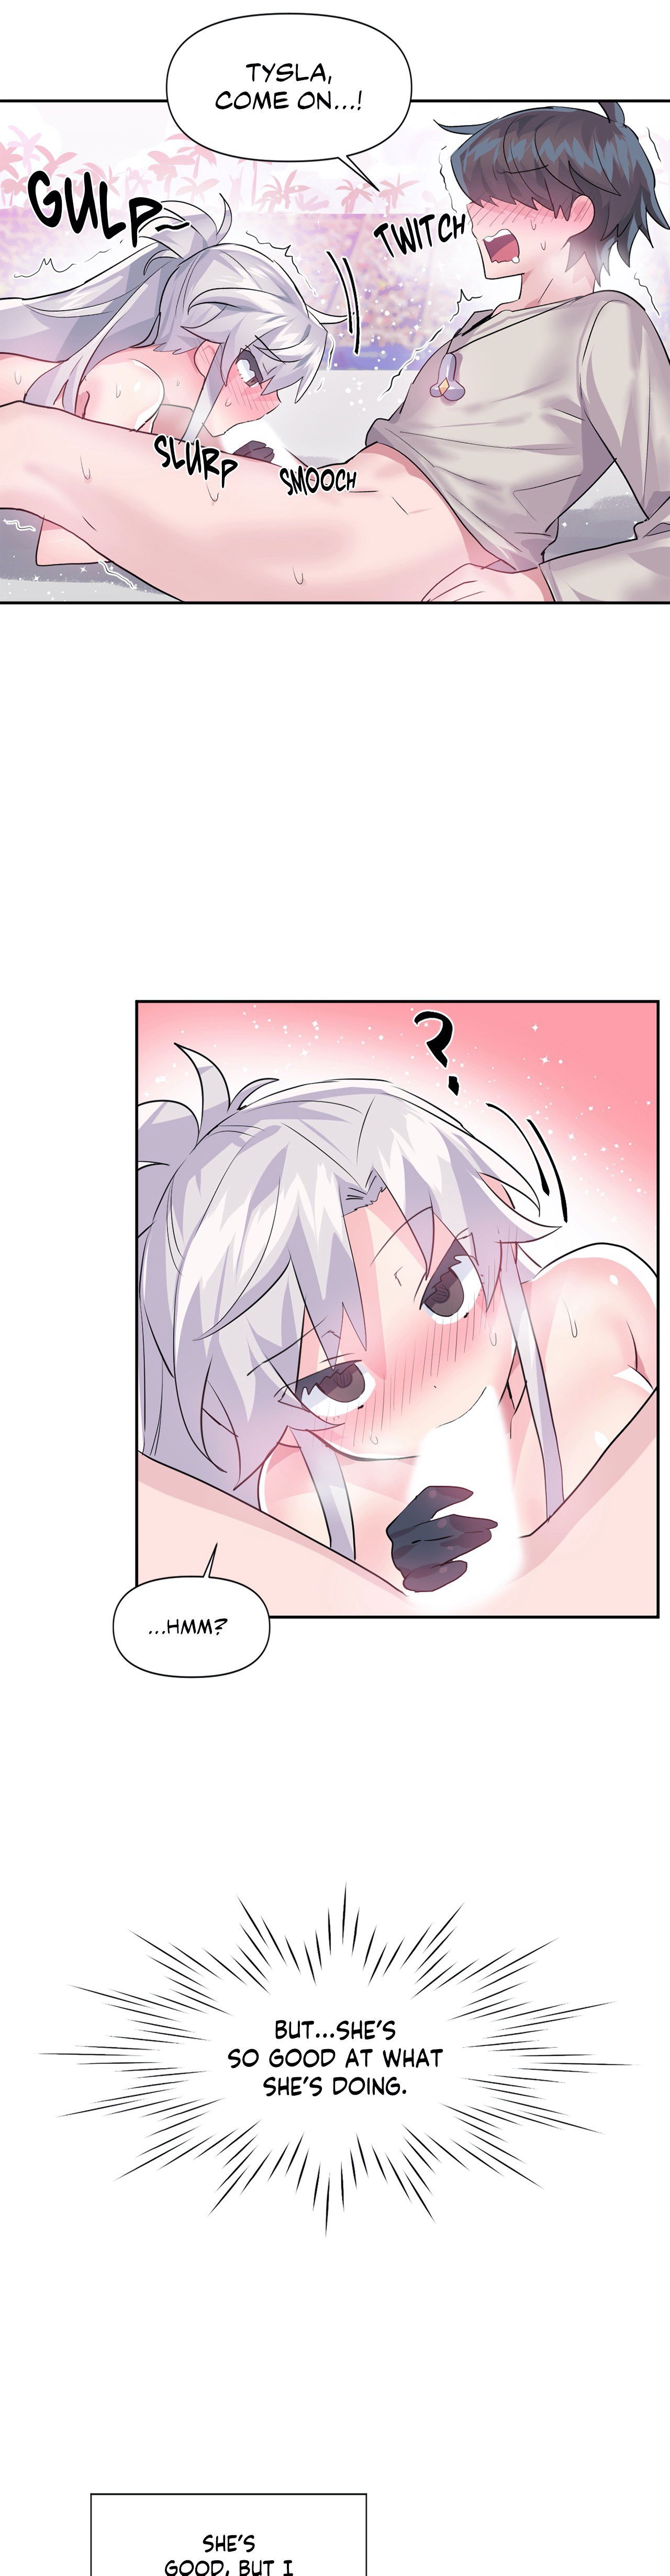 log-in-to-lust-a-land-chap-31-6